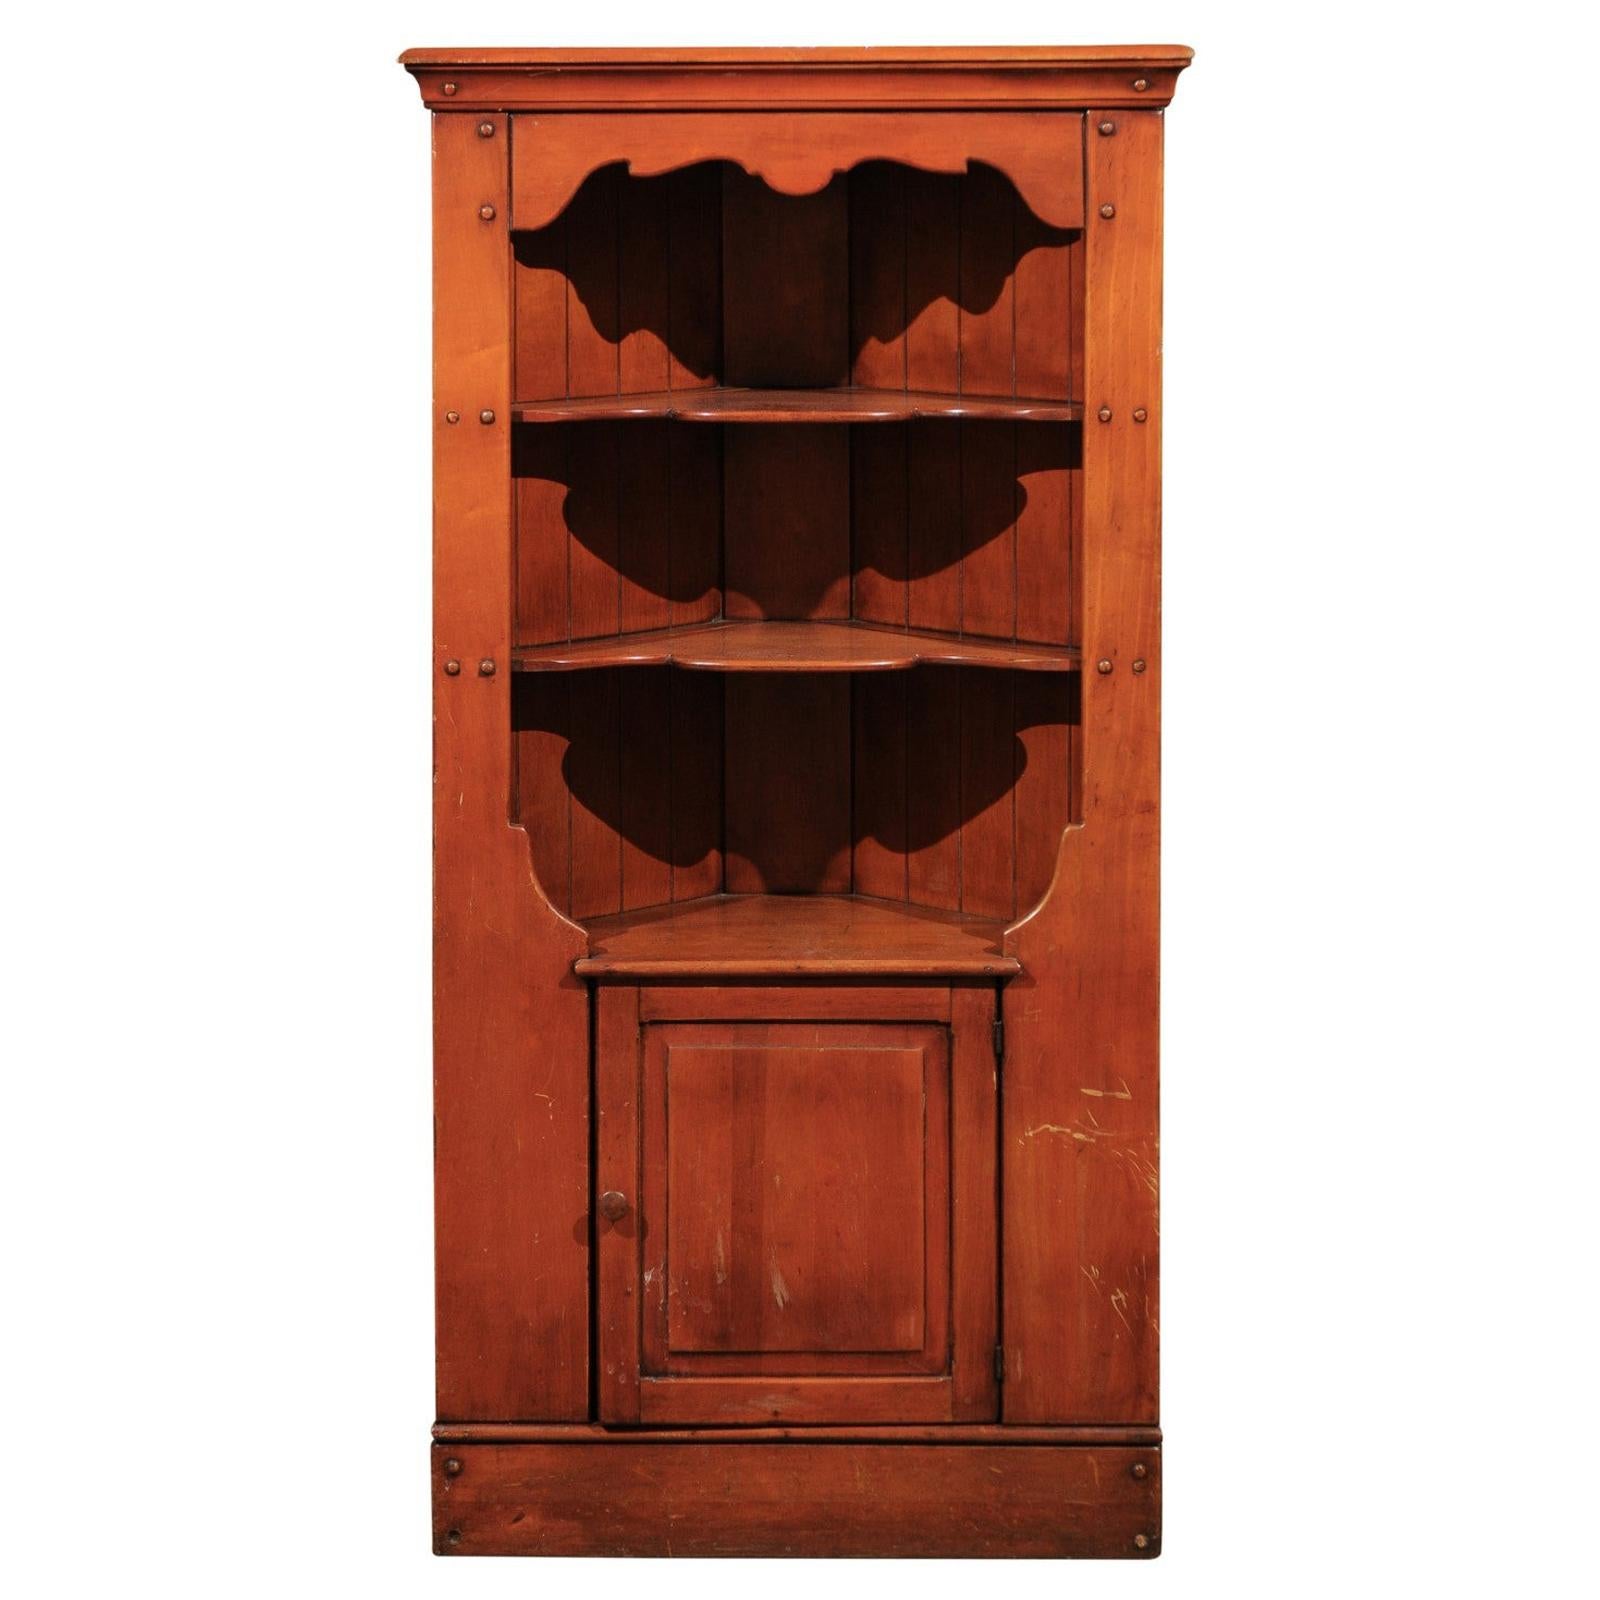 Early 20th Century American Cherry Corner Cabinet with Shelves and Single Door